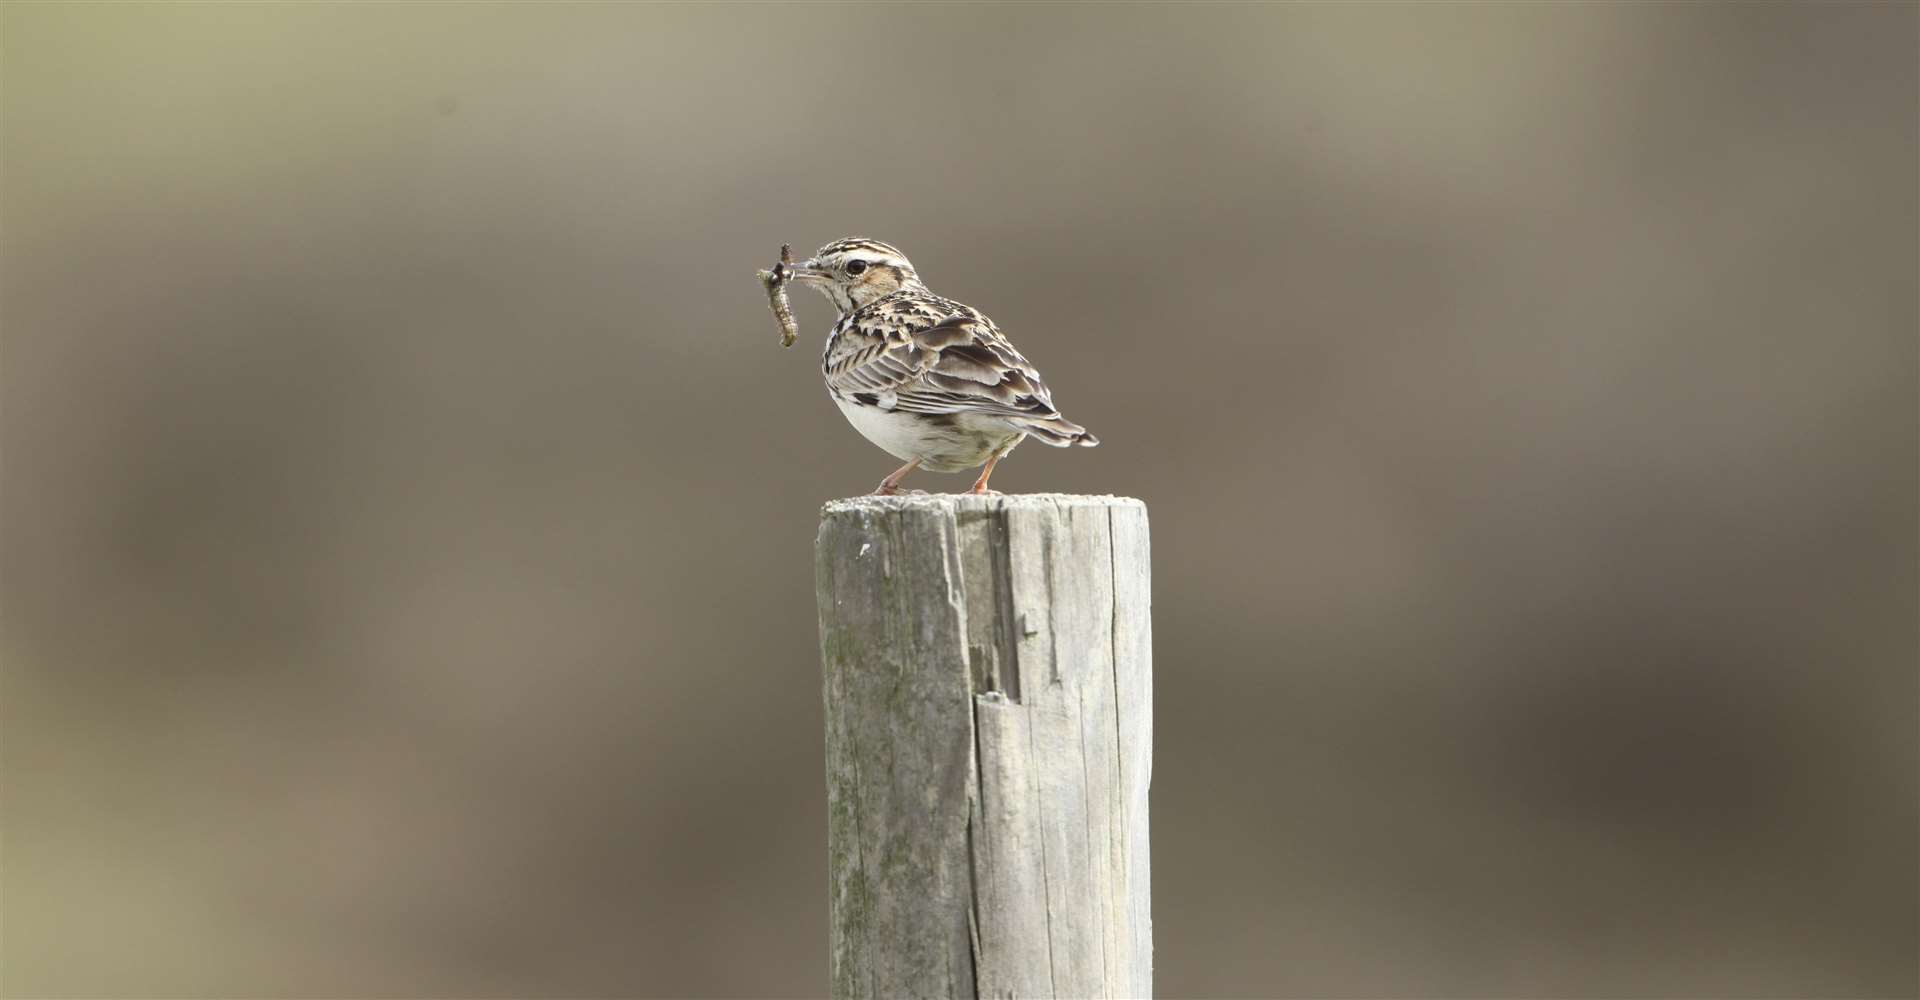 Will you see a woodlark? Picture: Paul Yorke-Dunne